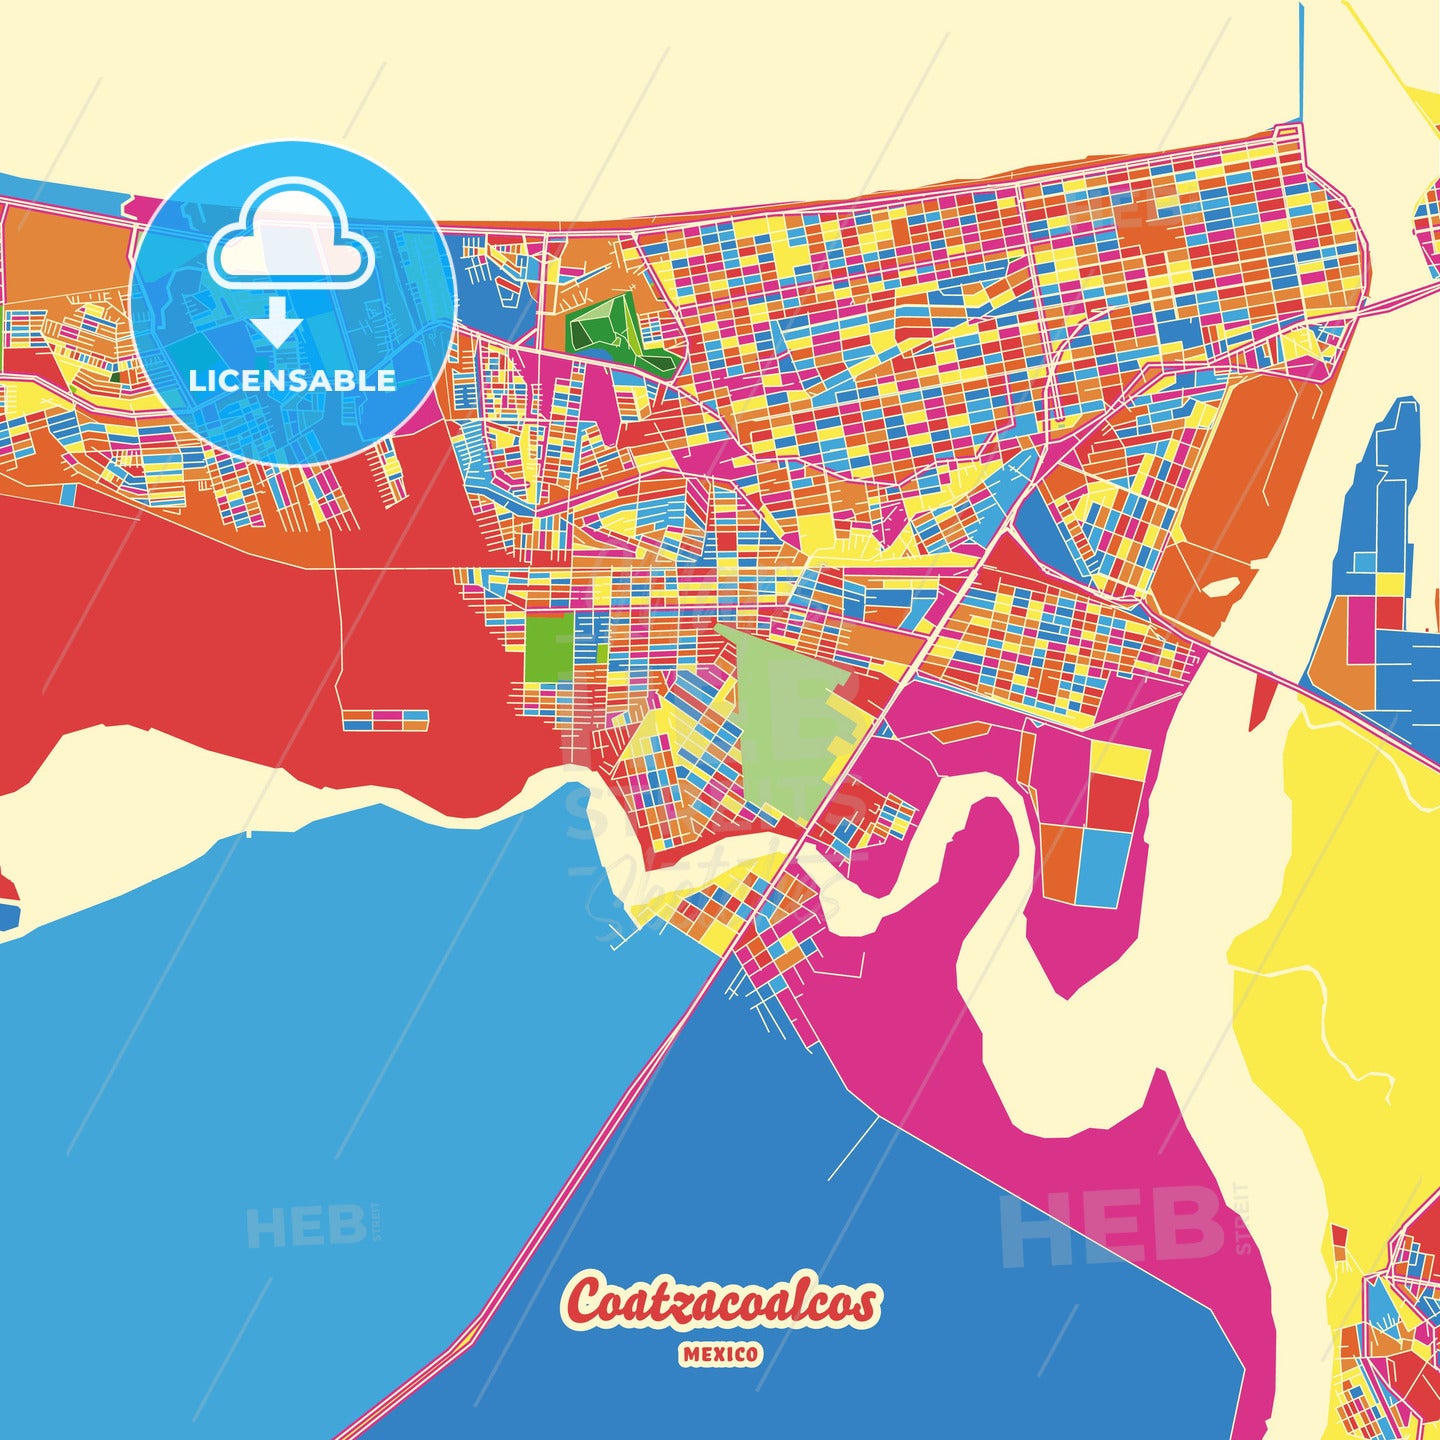 Coatzacoalcos, Mexico Crazy Colorful Street Map Poster Template - HEBSTREITS Sketches